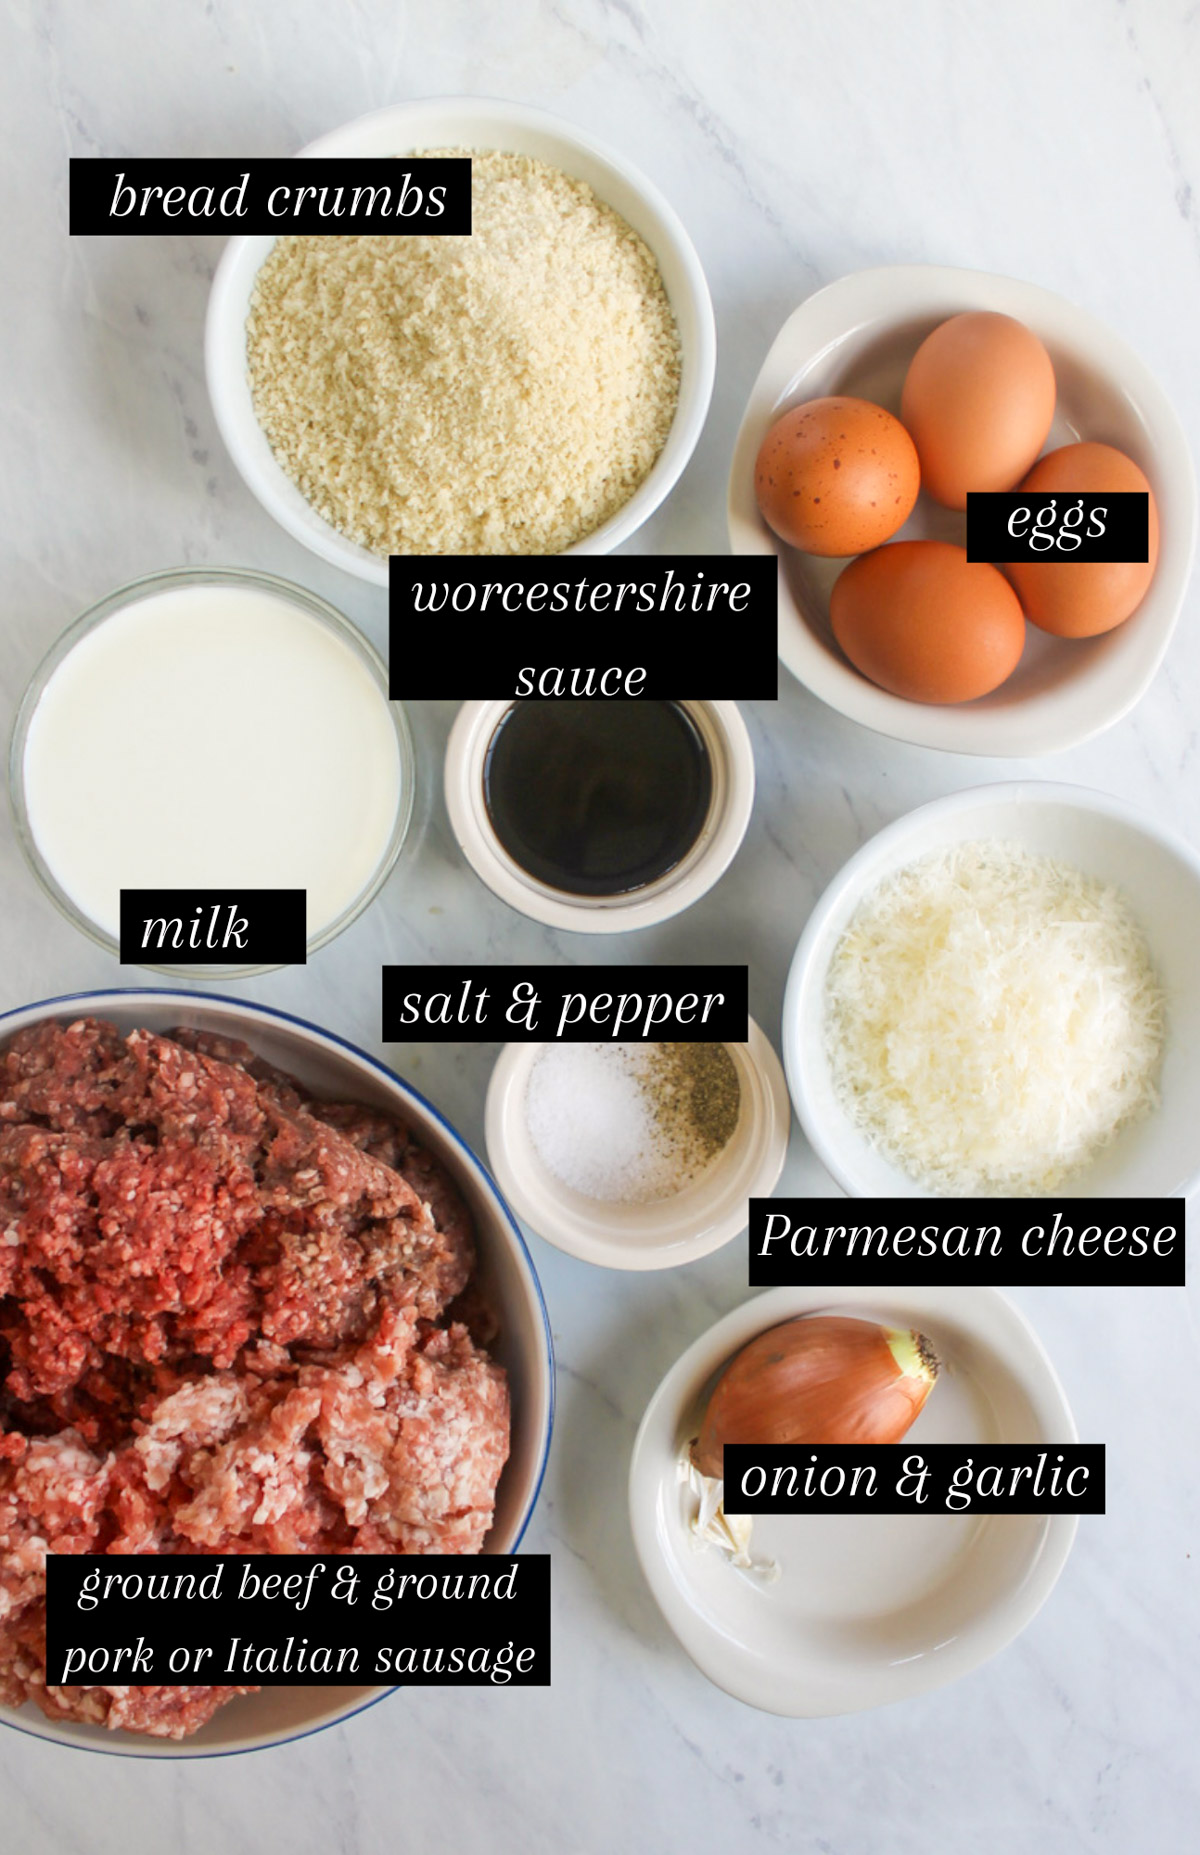 Labeled ingredients for meatball subs.